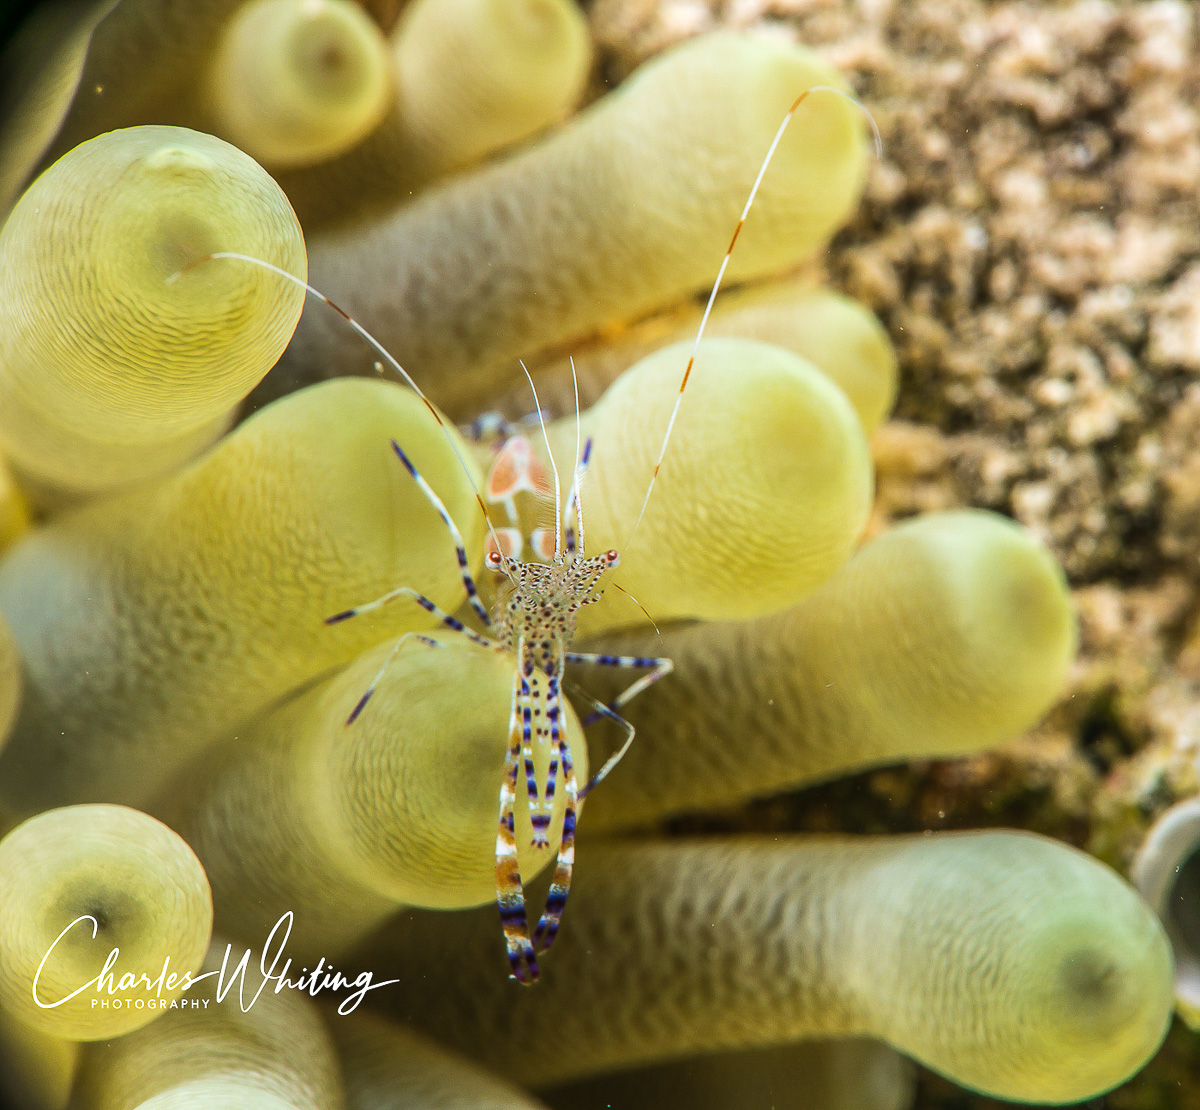 A Spotted Cleaner Shrimp has opened shop on a Green Anemone in Bonaire